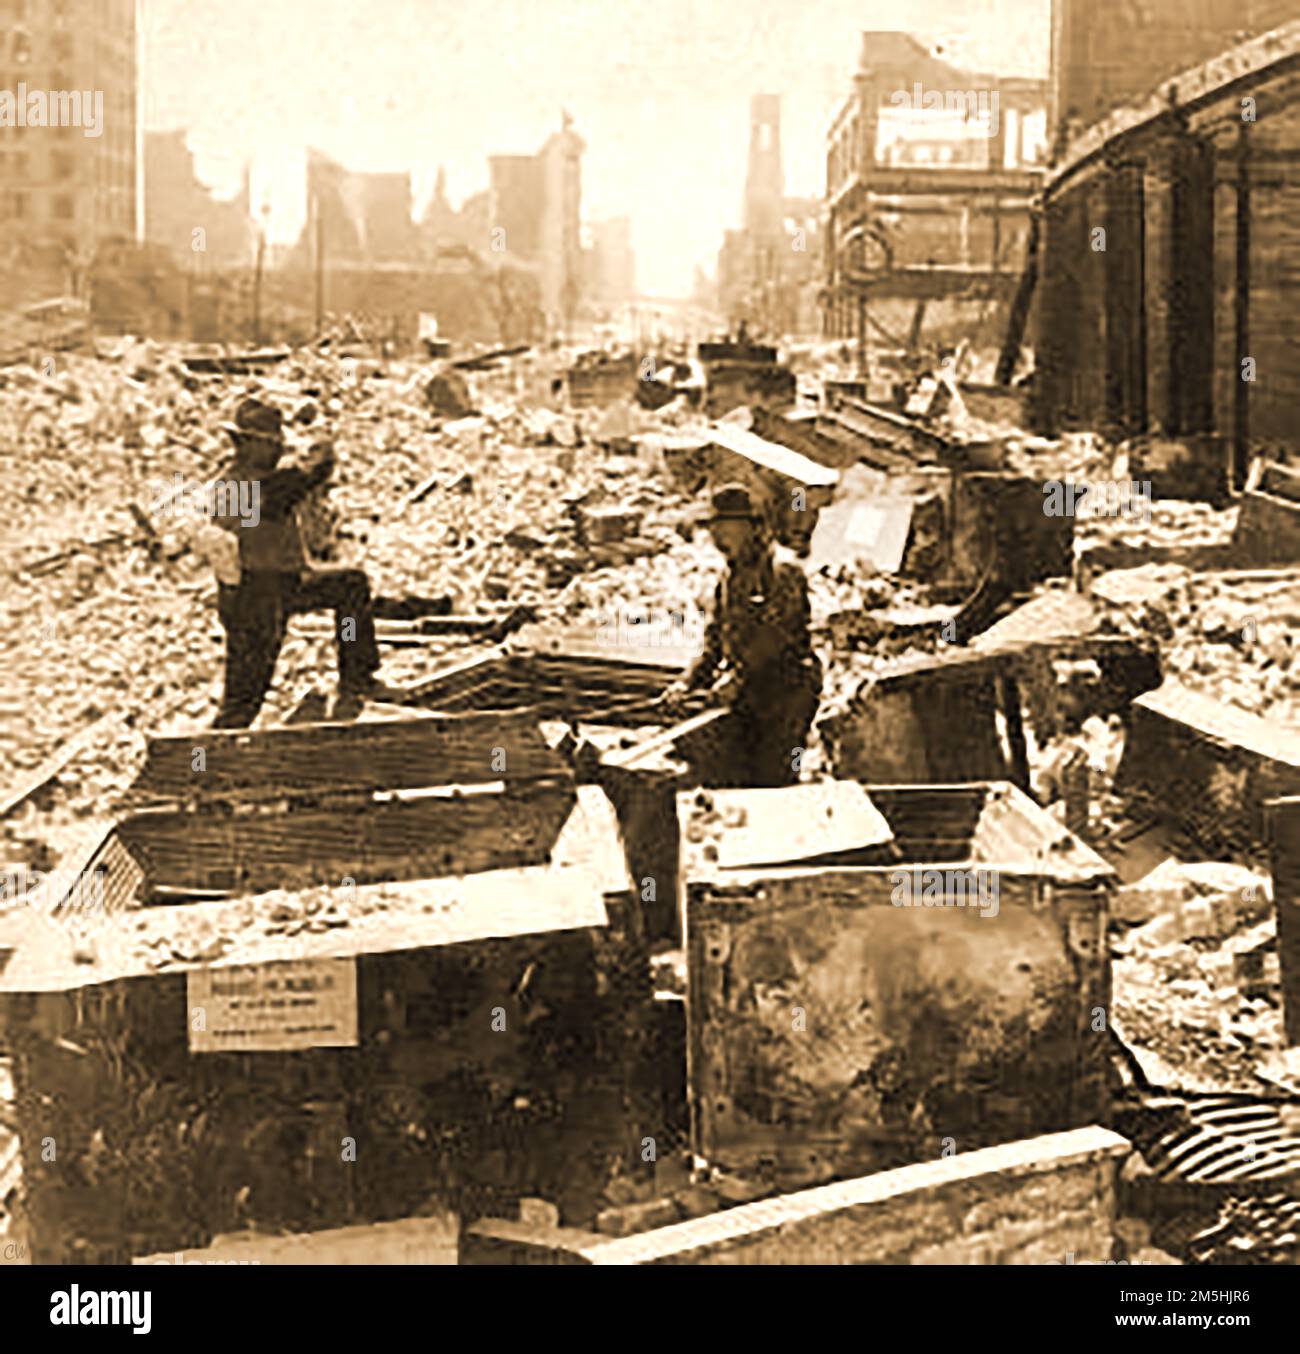 Clearing up after the San Francisco earthquake 1906. Stock Photo